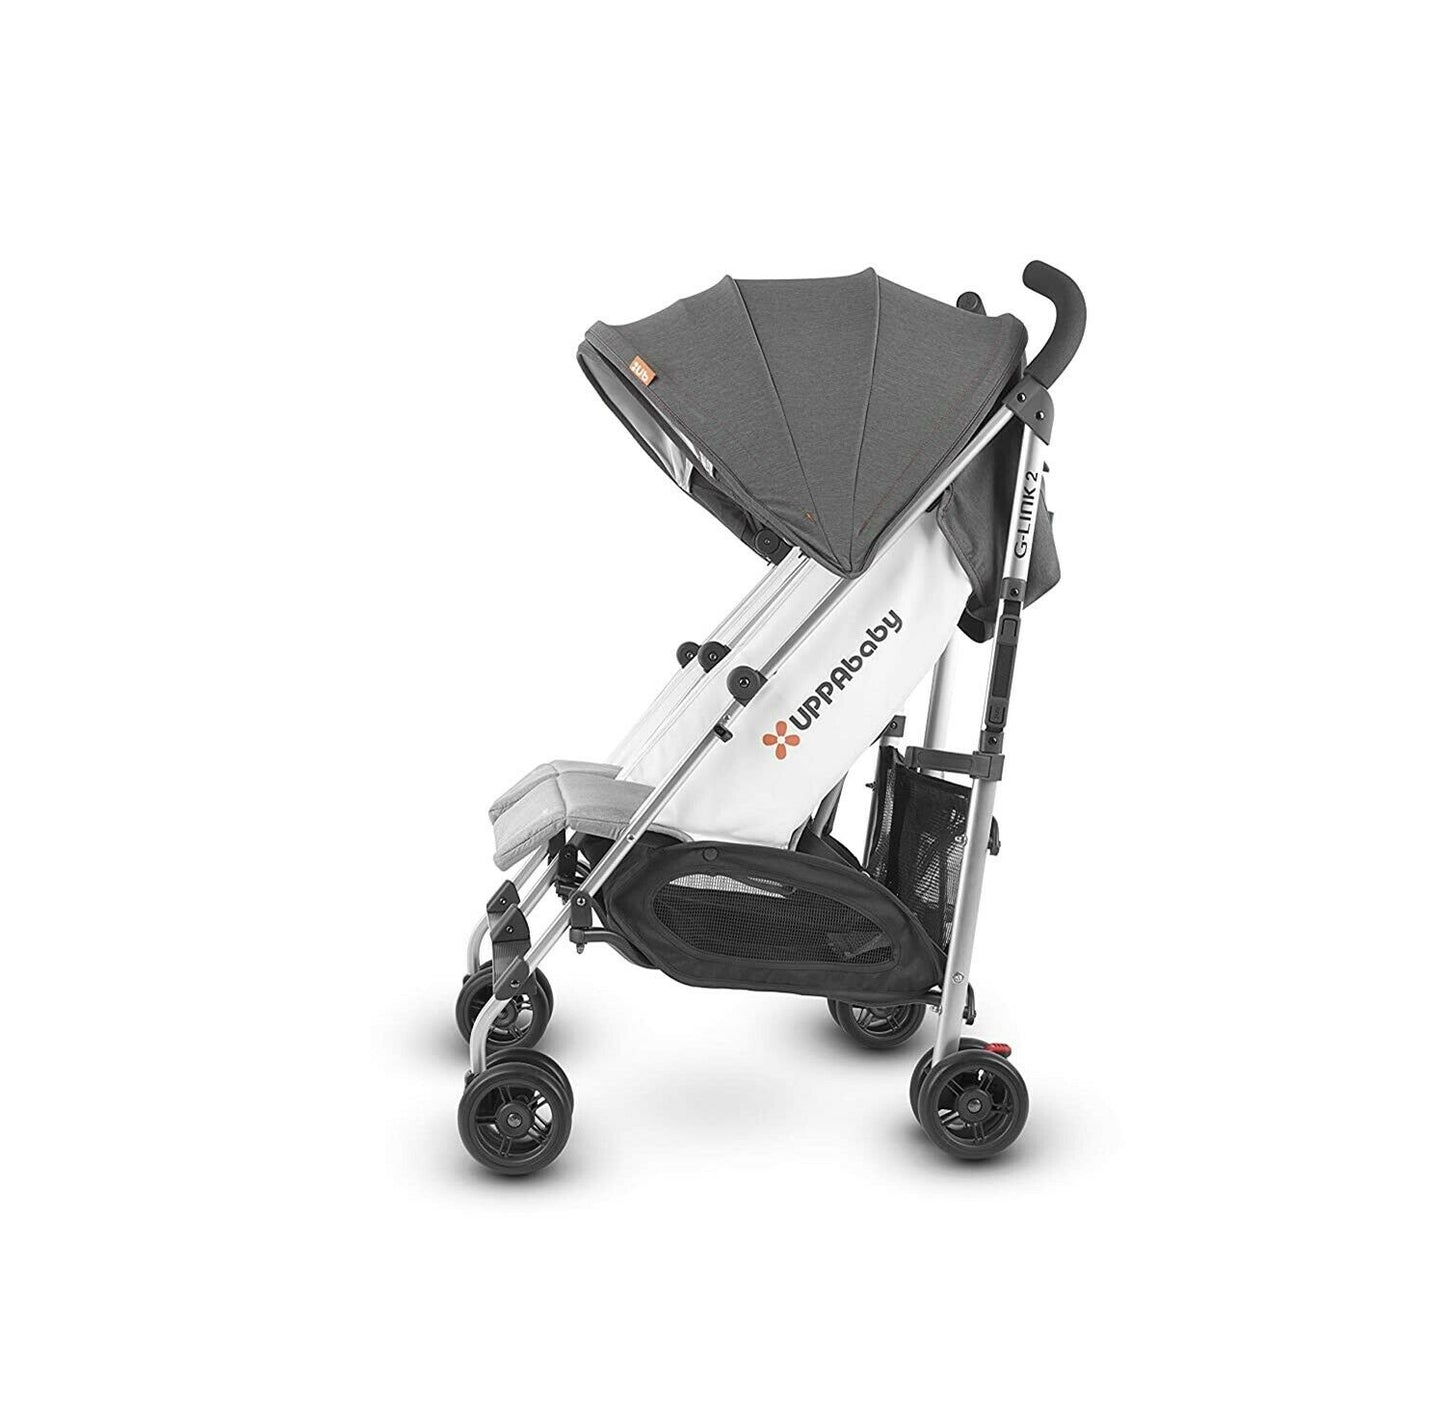 G-LINK 2 Double Baby Stroller by UPPAbaby Compact Lightweight Travel